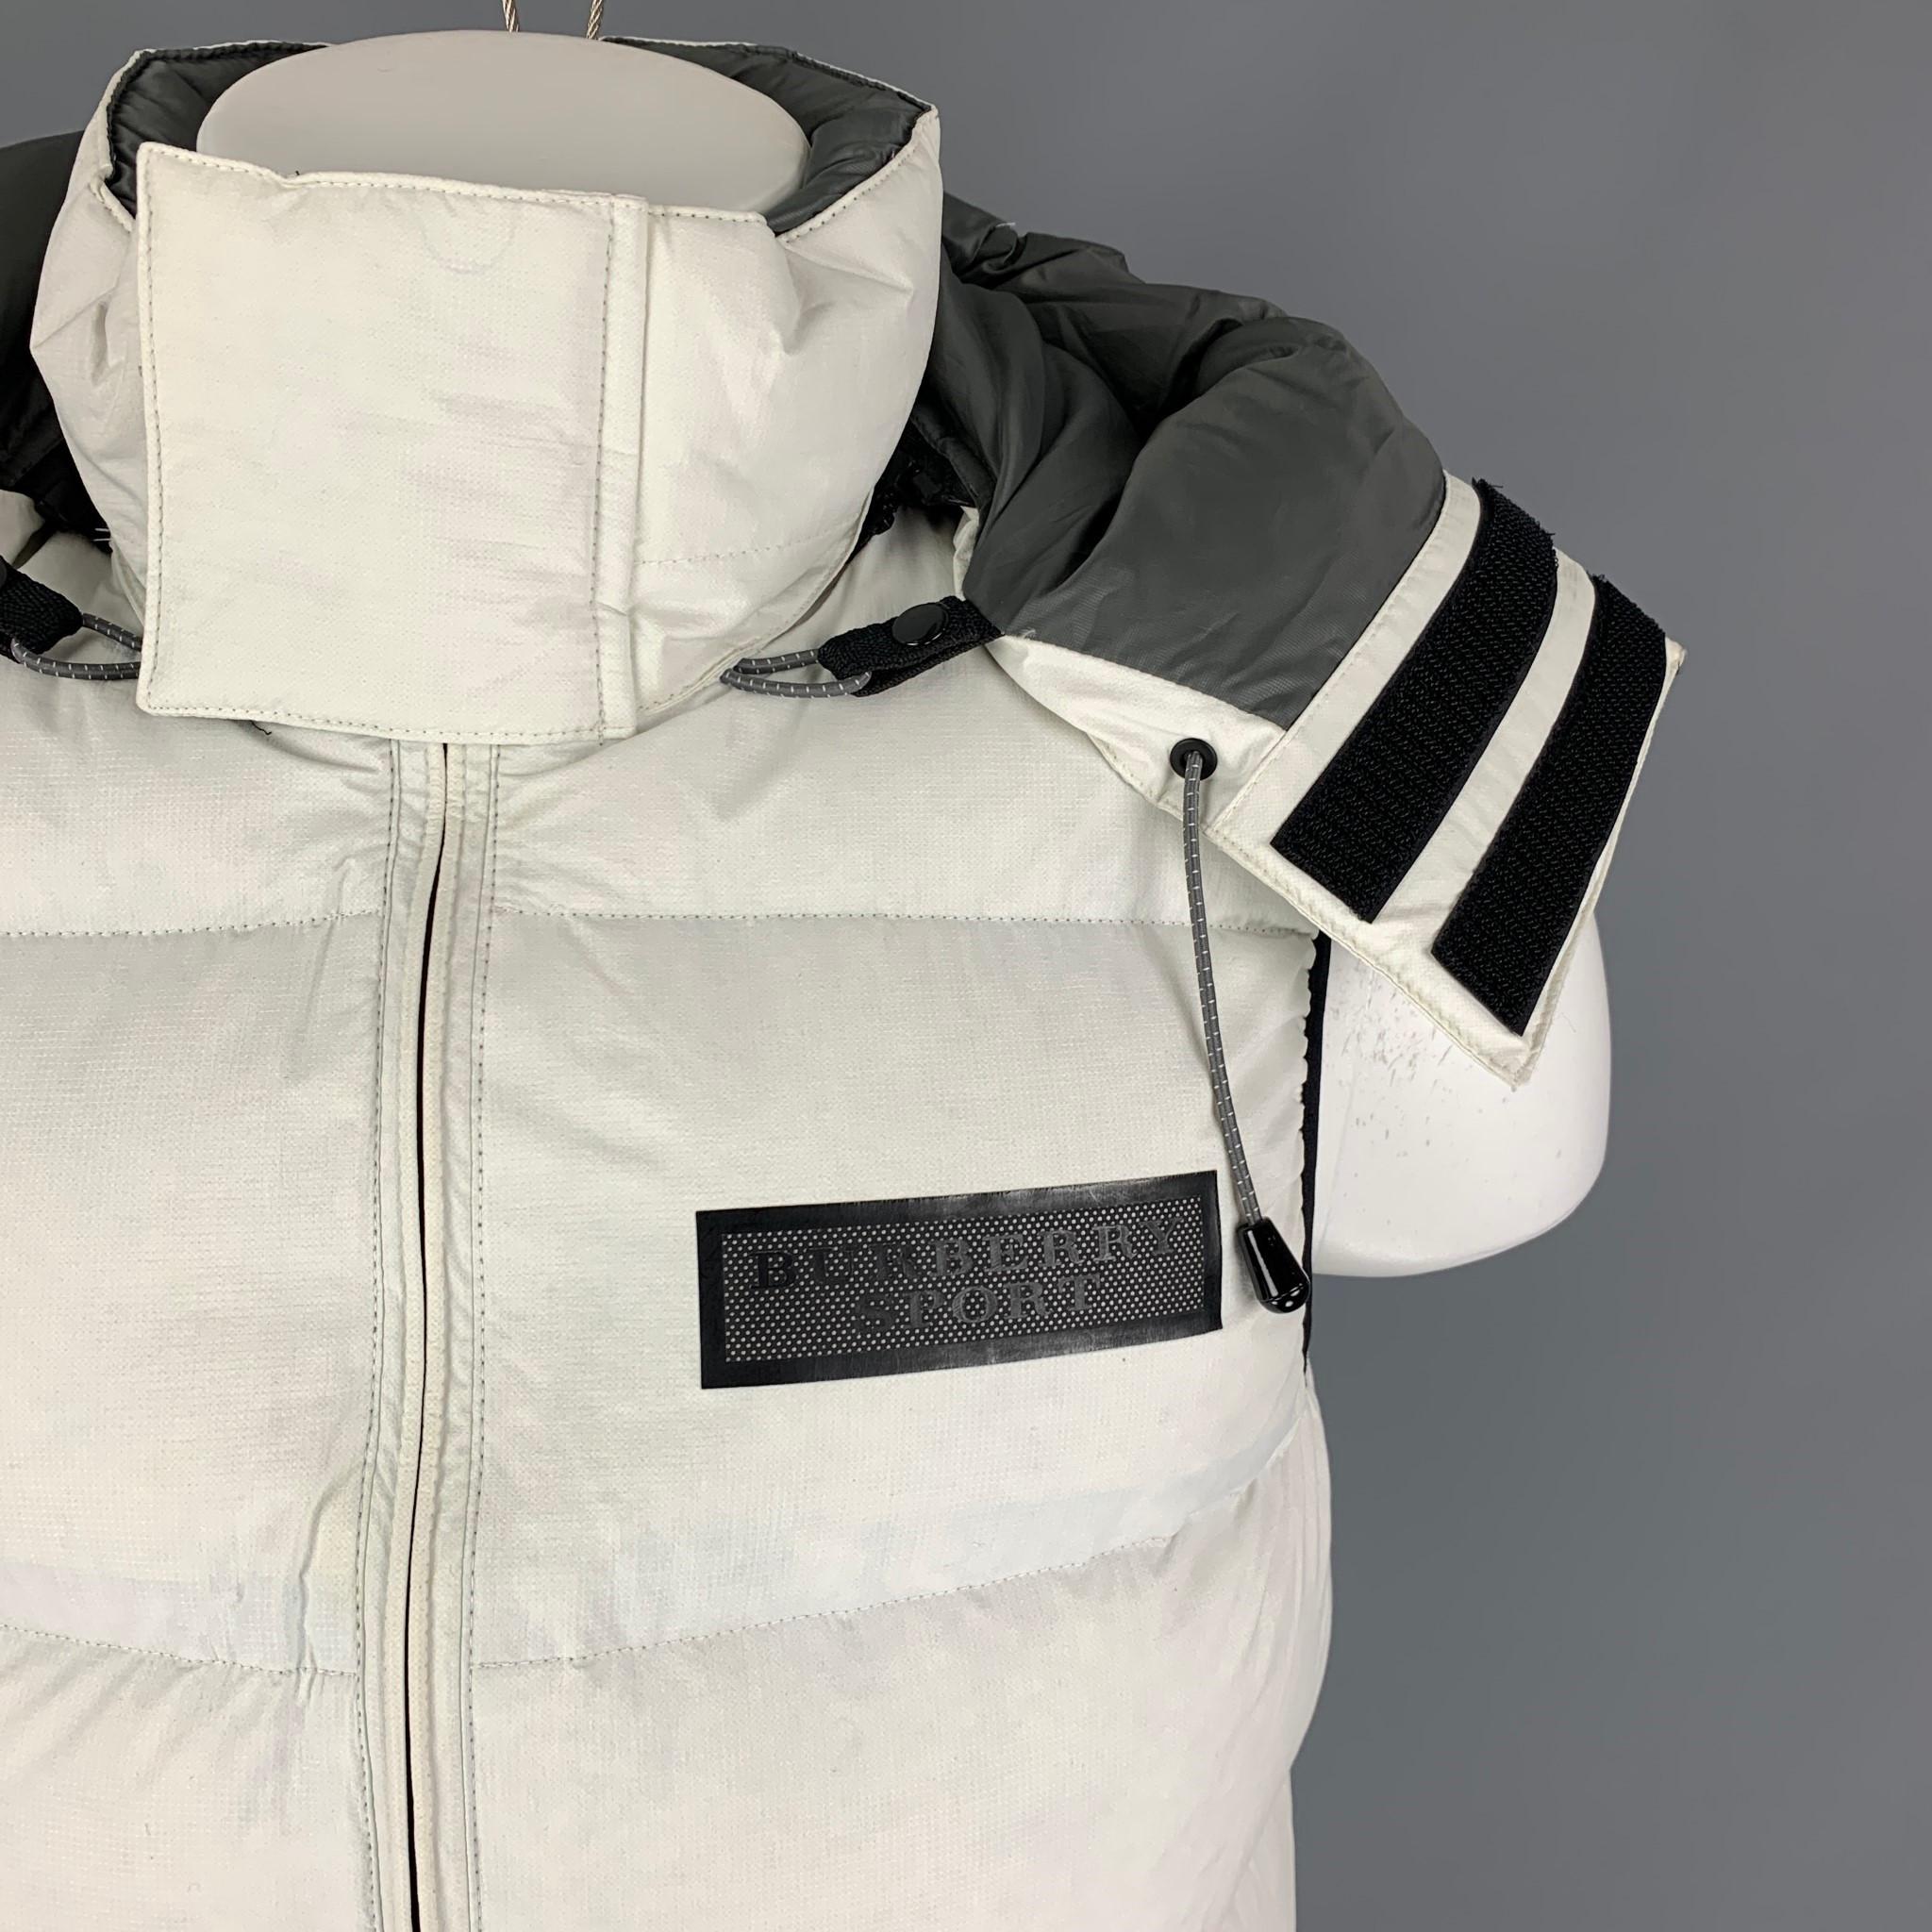 BURBERRY SPORT puffer vest comes in a off white quilted polyamide with duck down featuring a detachable hood, black contrast trim, front zipper pockets, and a full zip up closure. 

Very Good Pre-Owned Condition.
Marked: M

Measurements:

Shoulder: